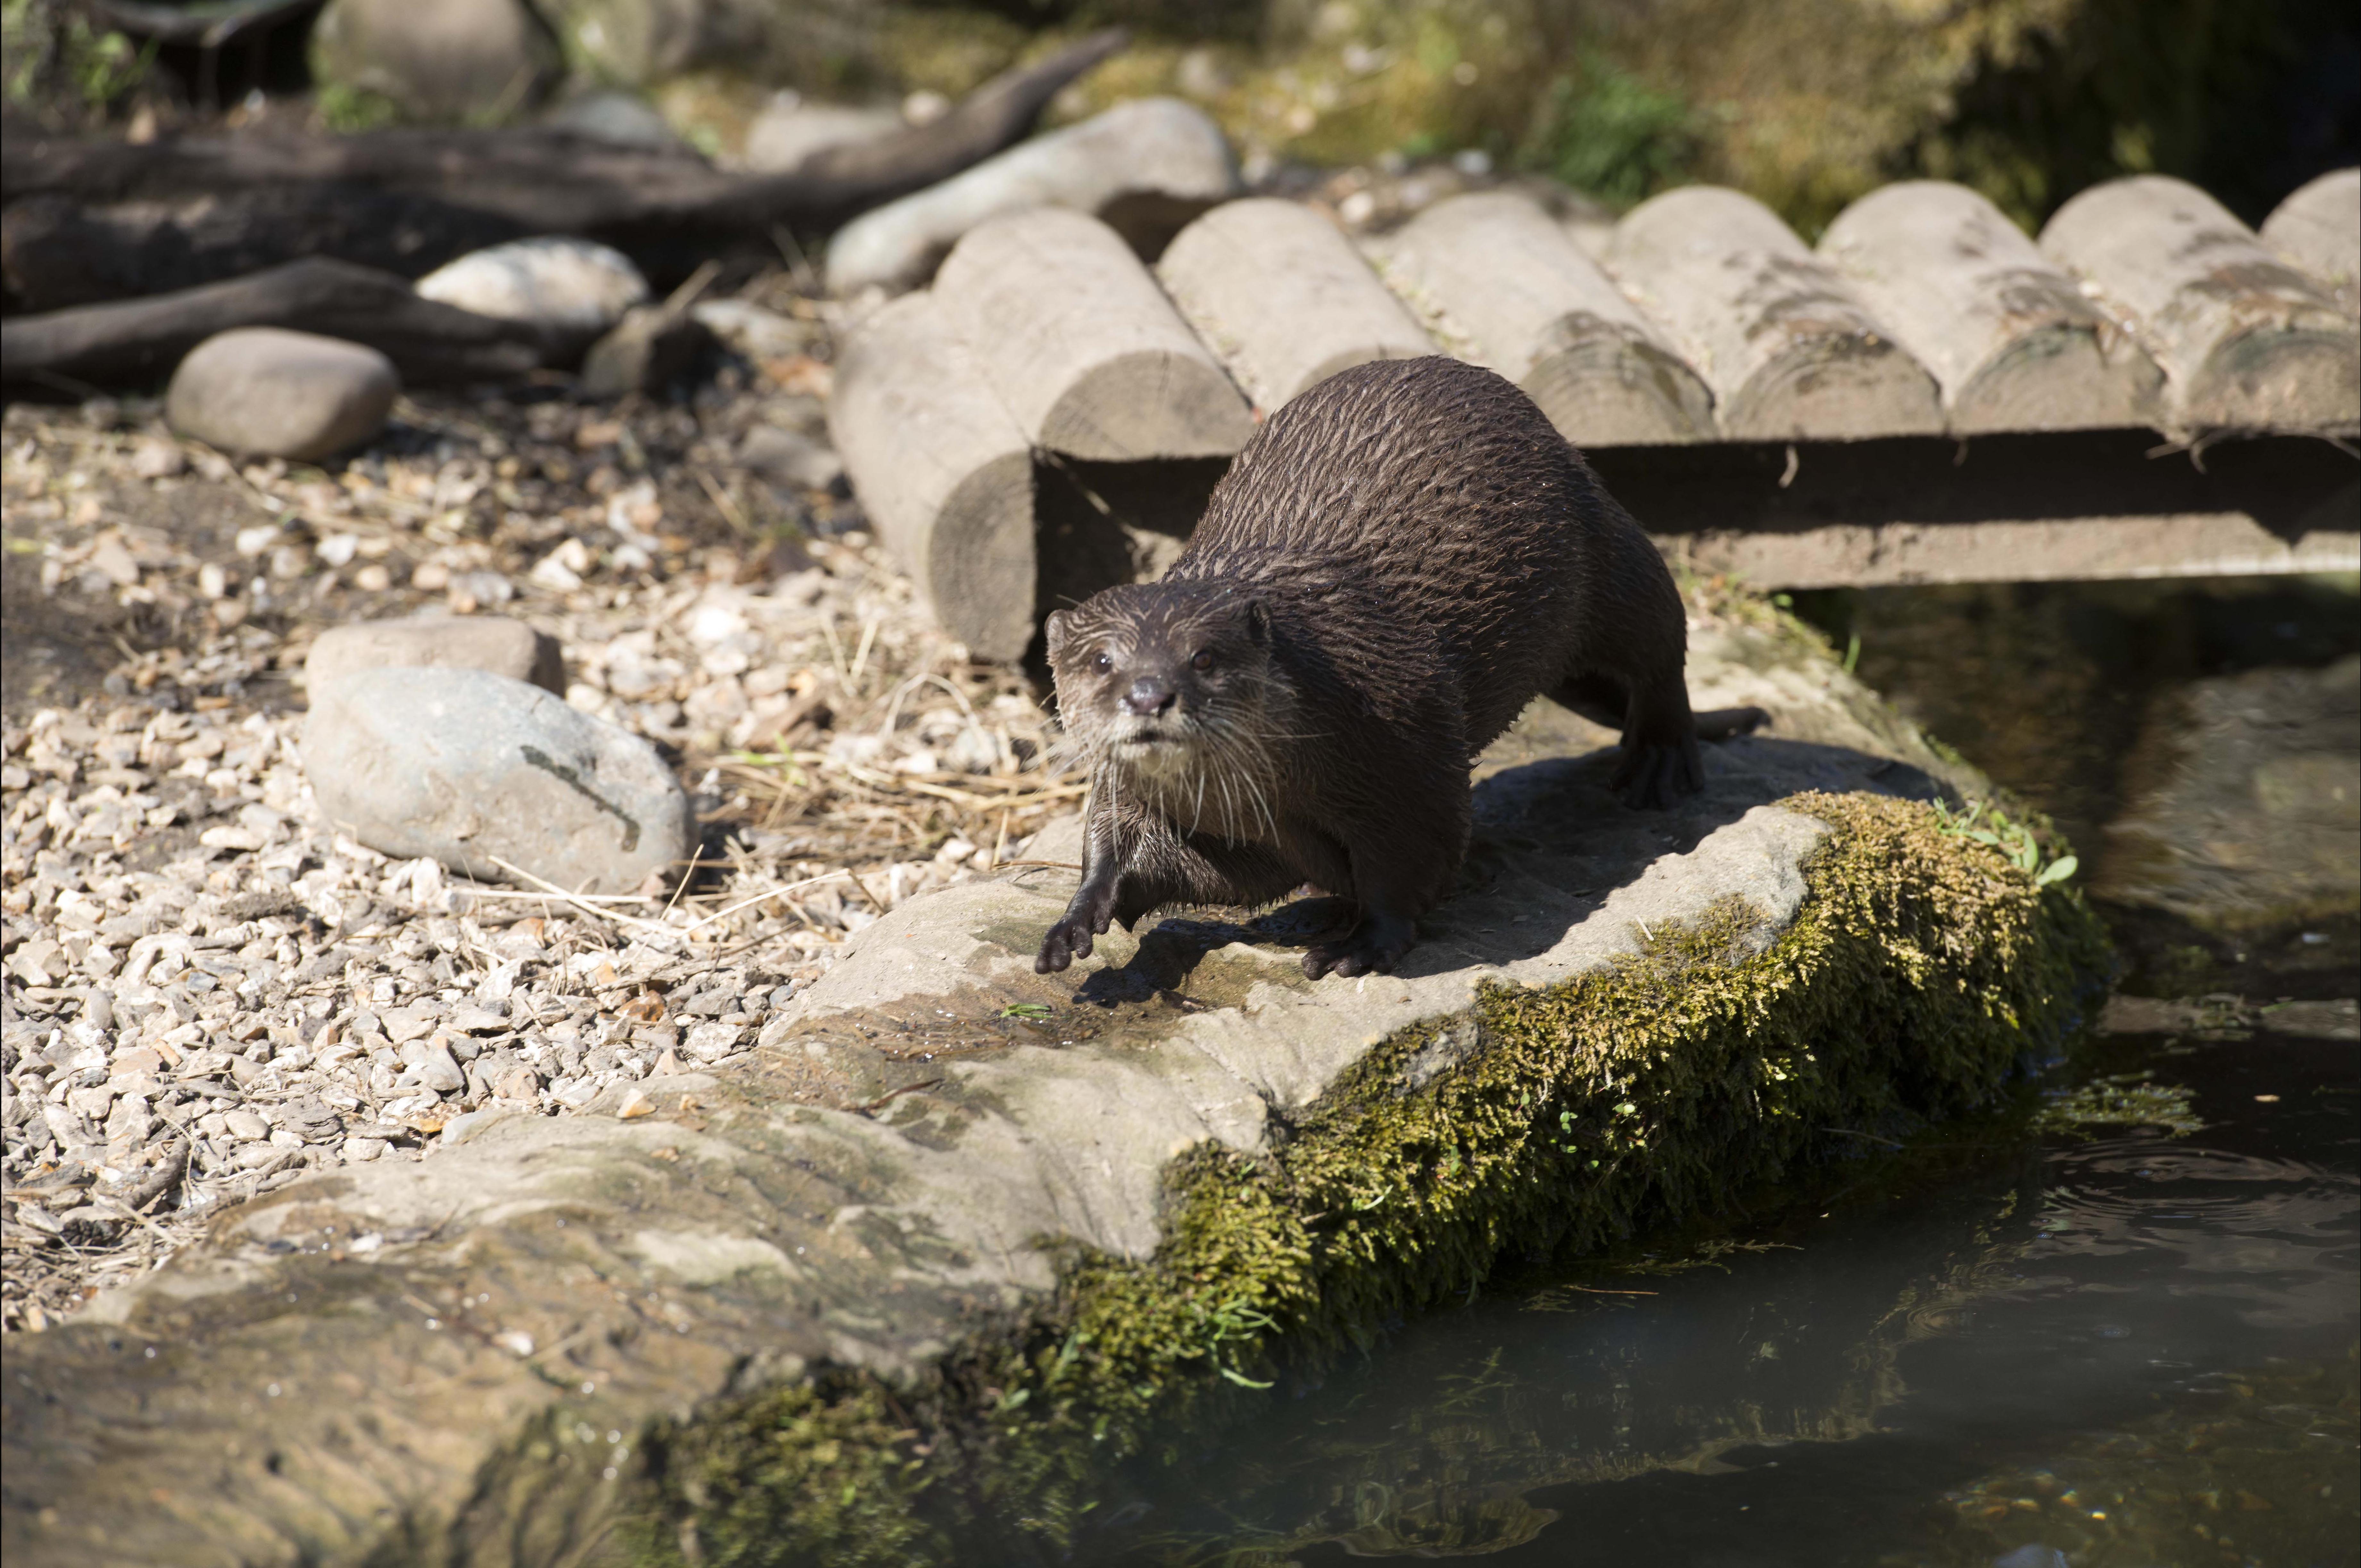 Asian short clawed otters at SEA LIFE Weymouth